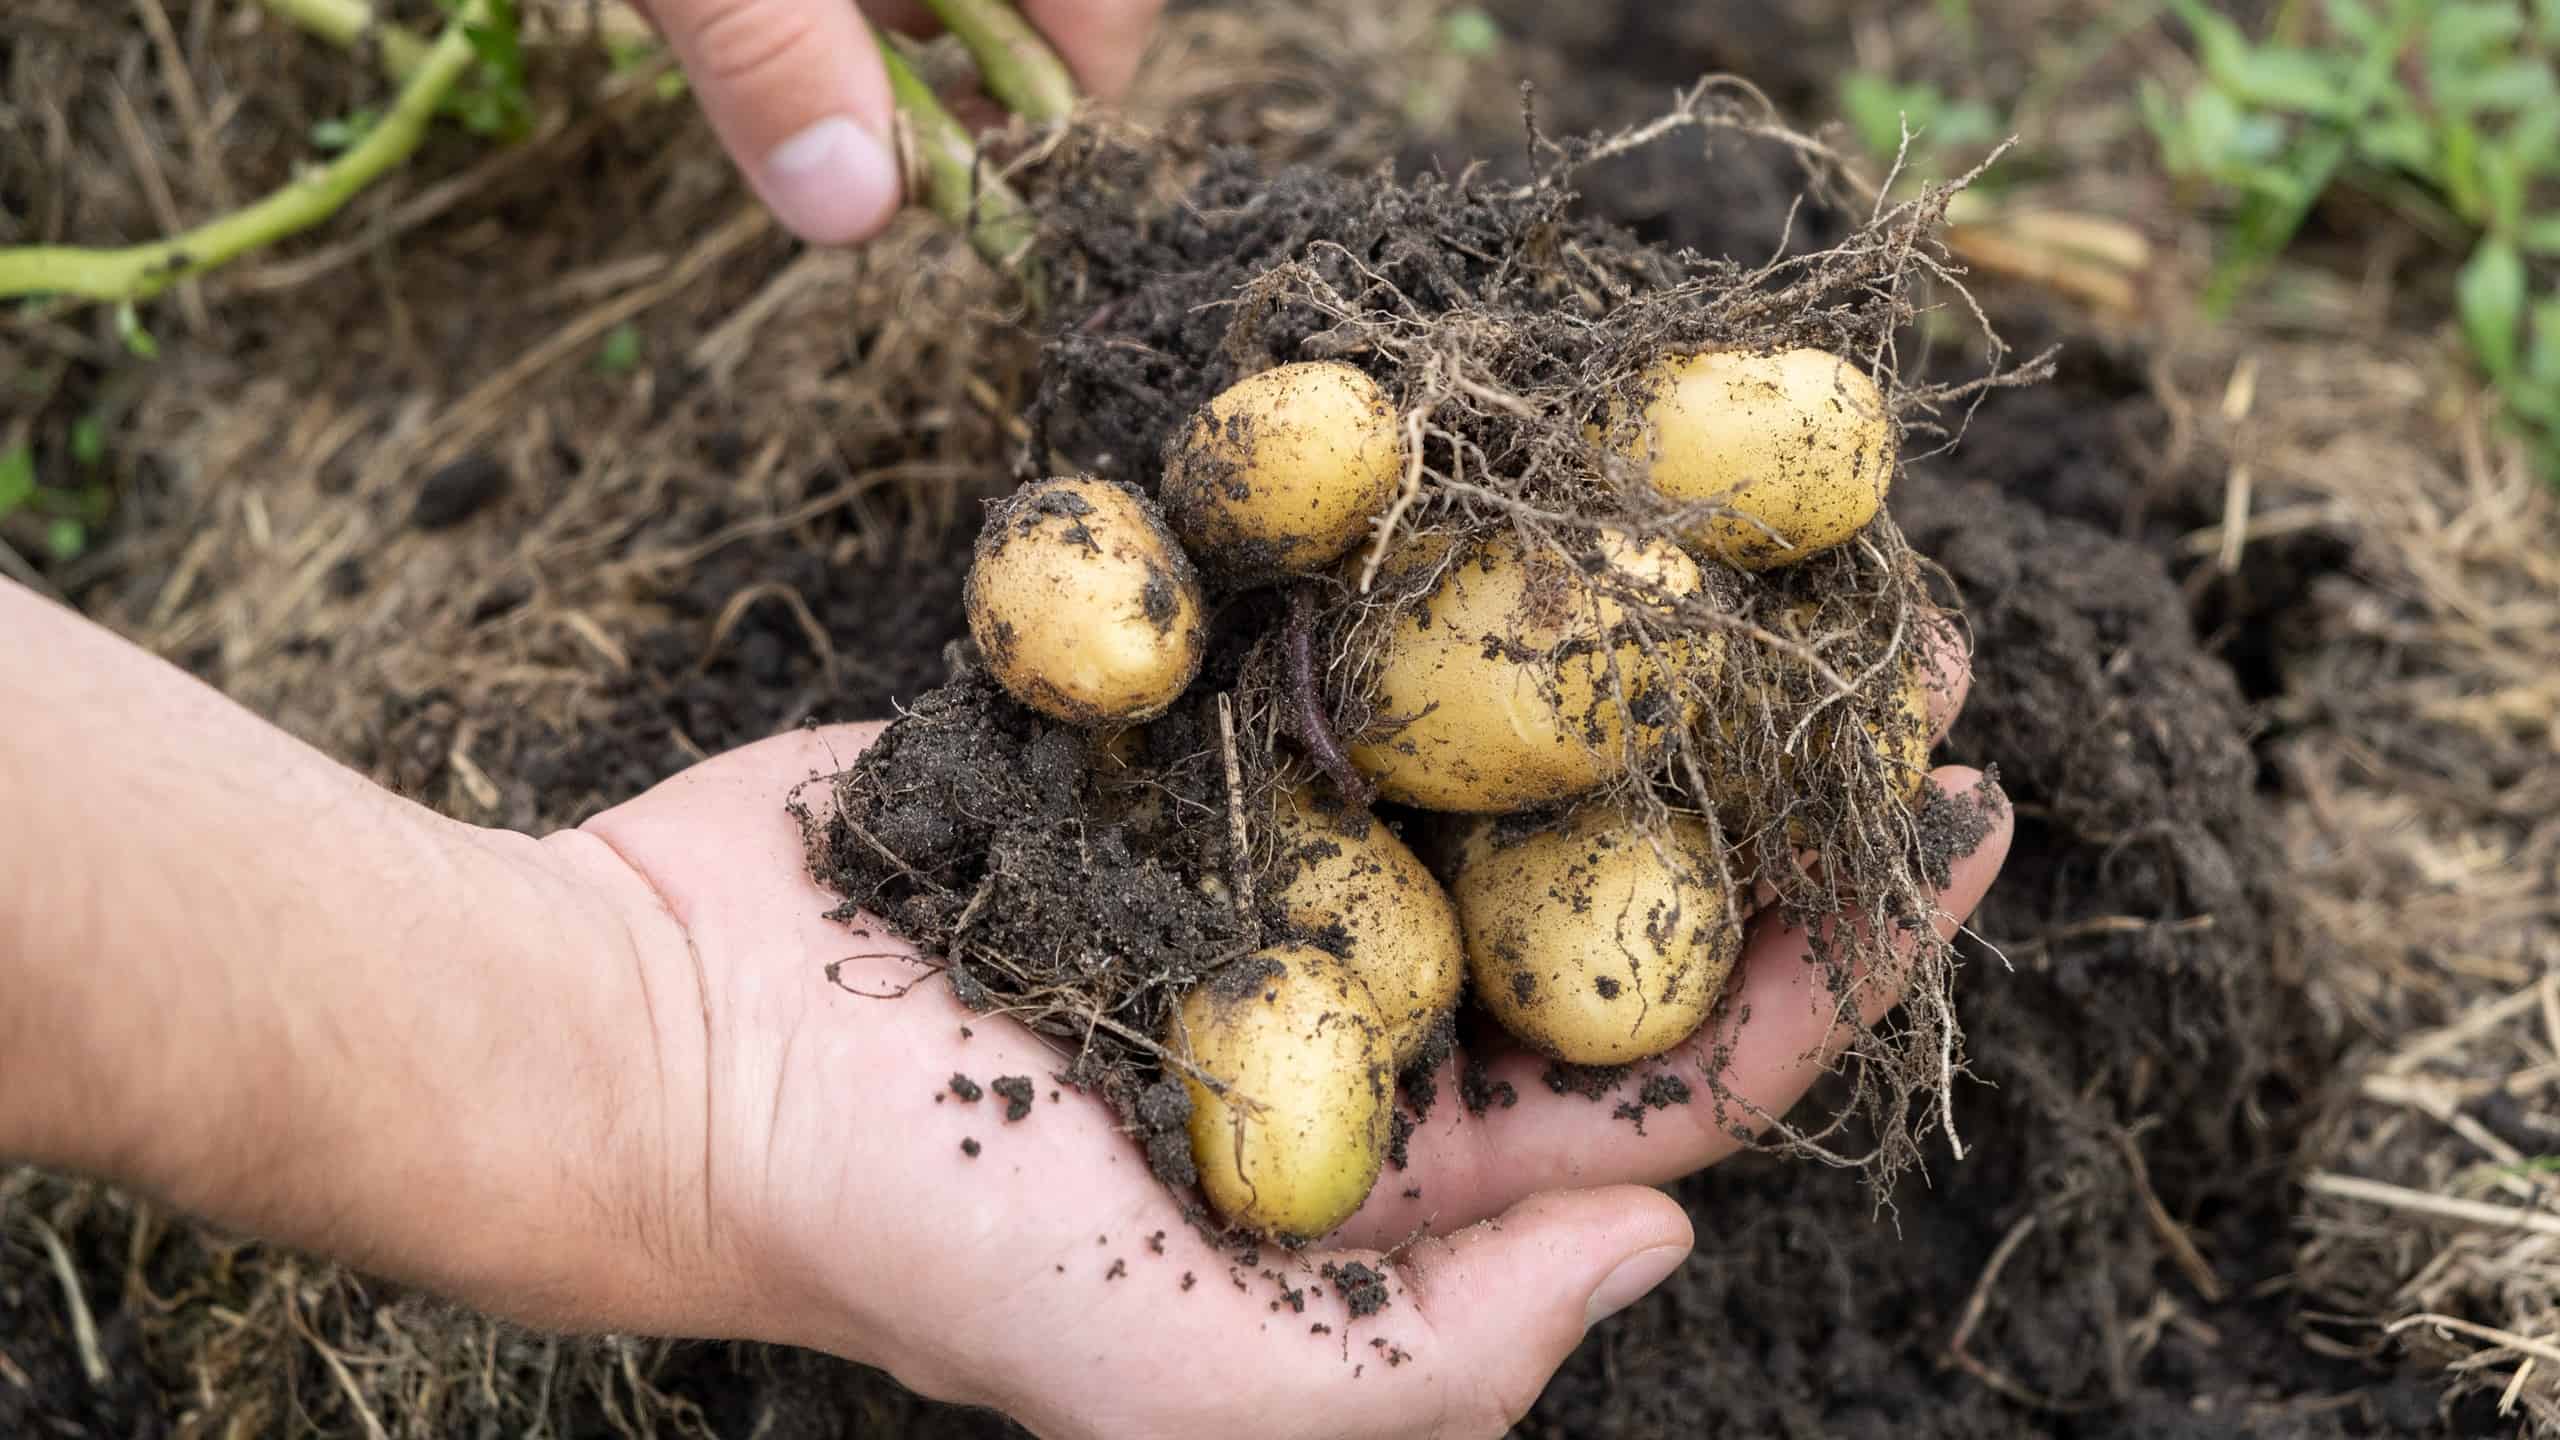 7 Ways to Grow Potatoes at Home - How to Grow Potatoes in a Box